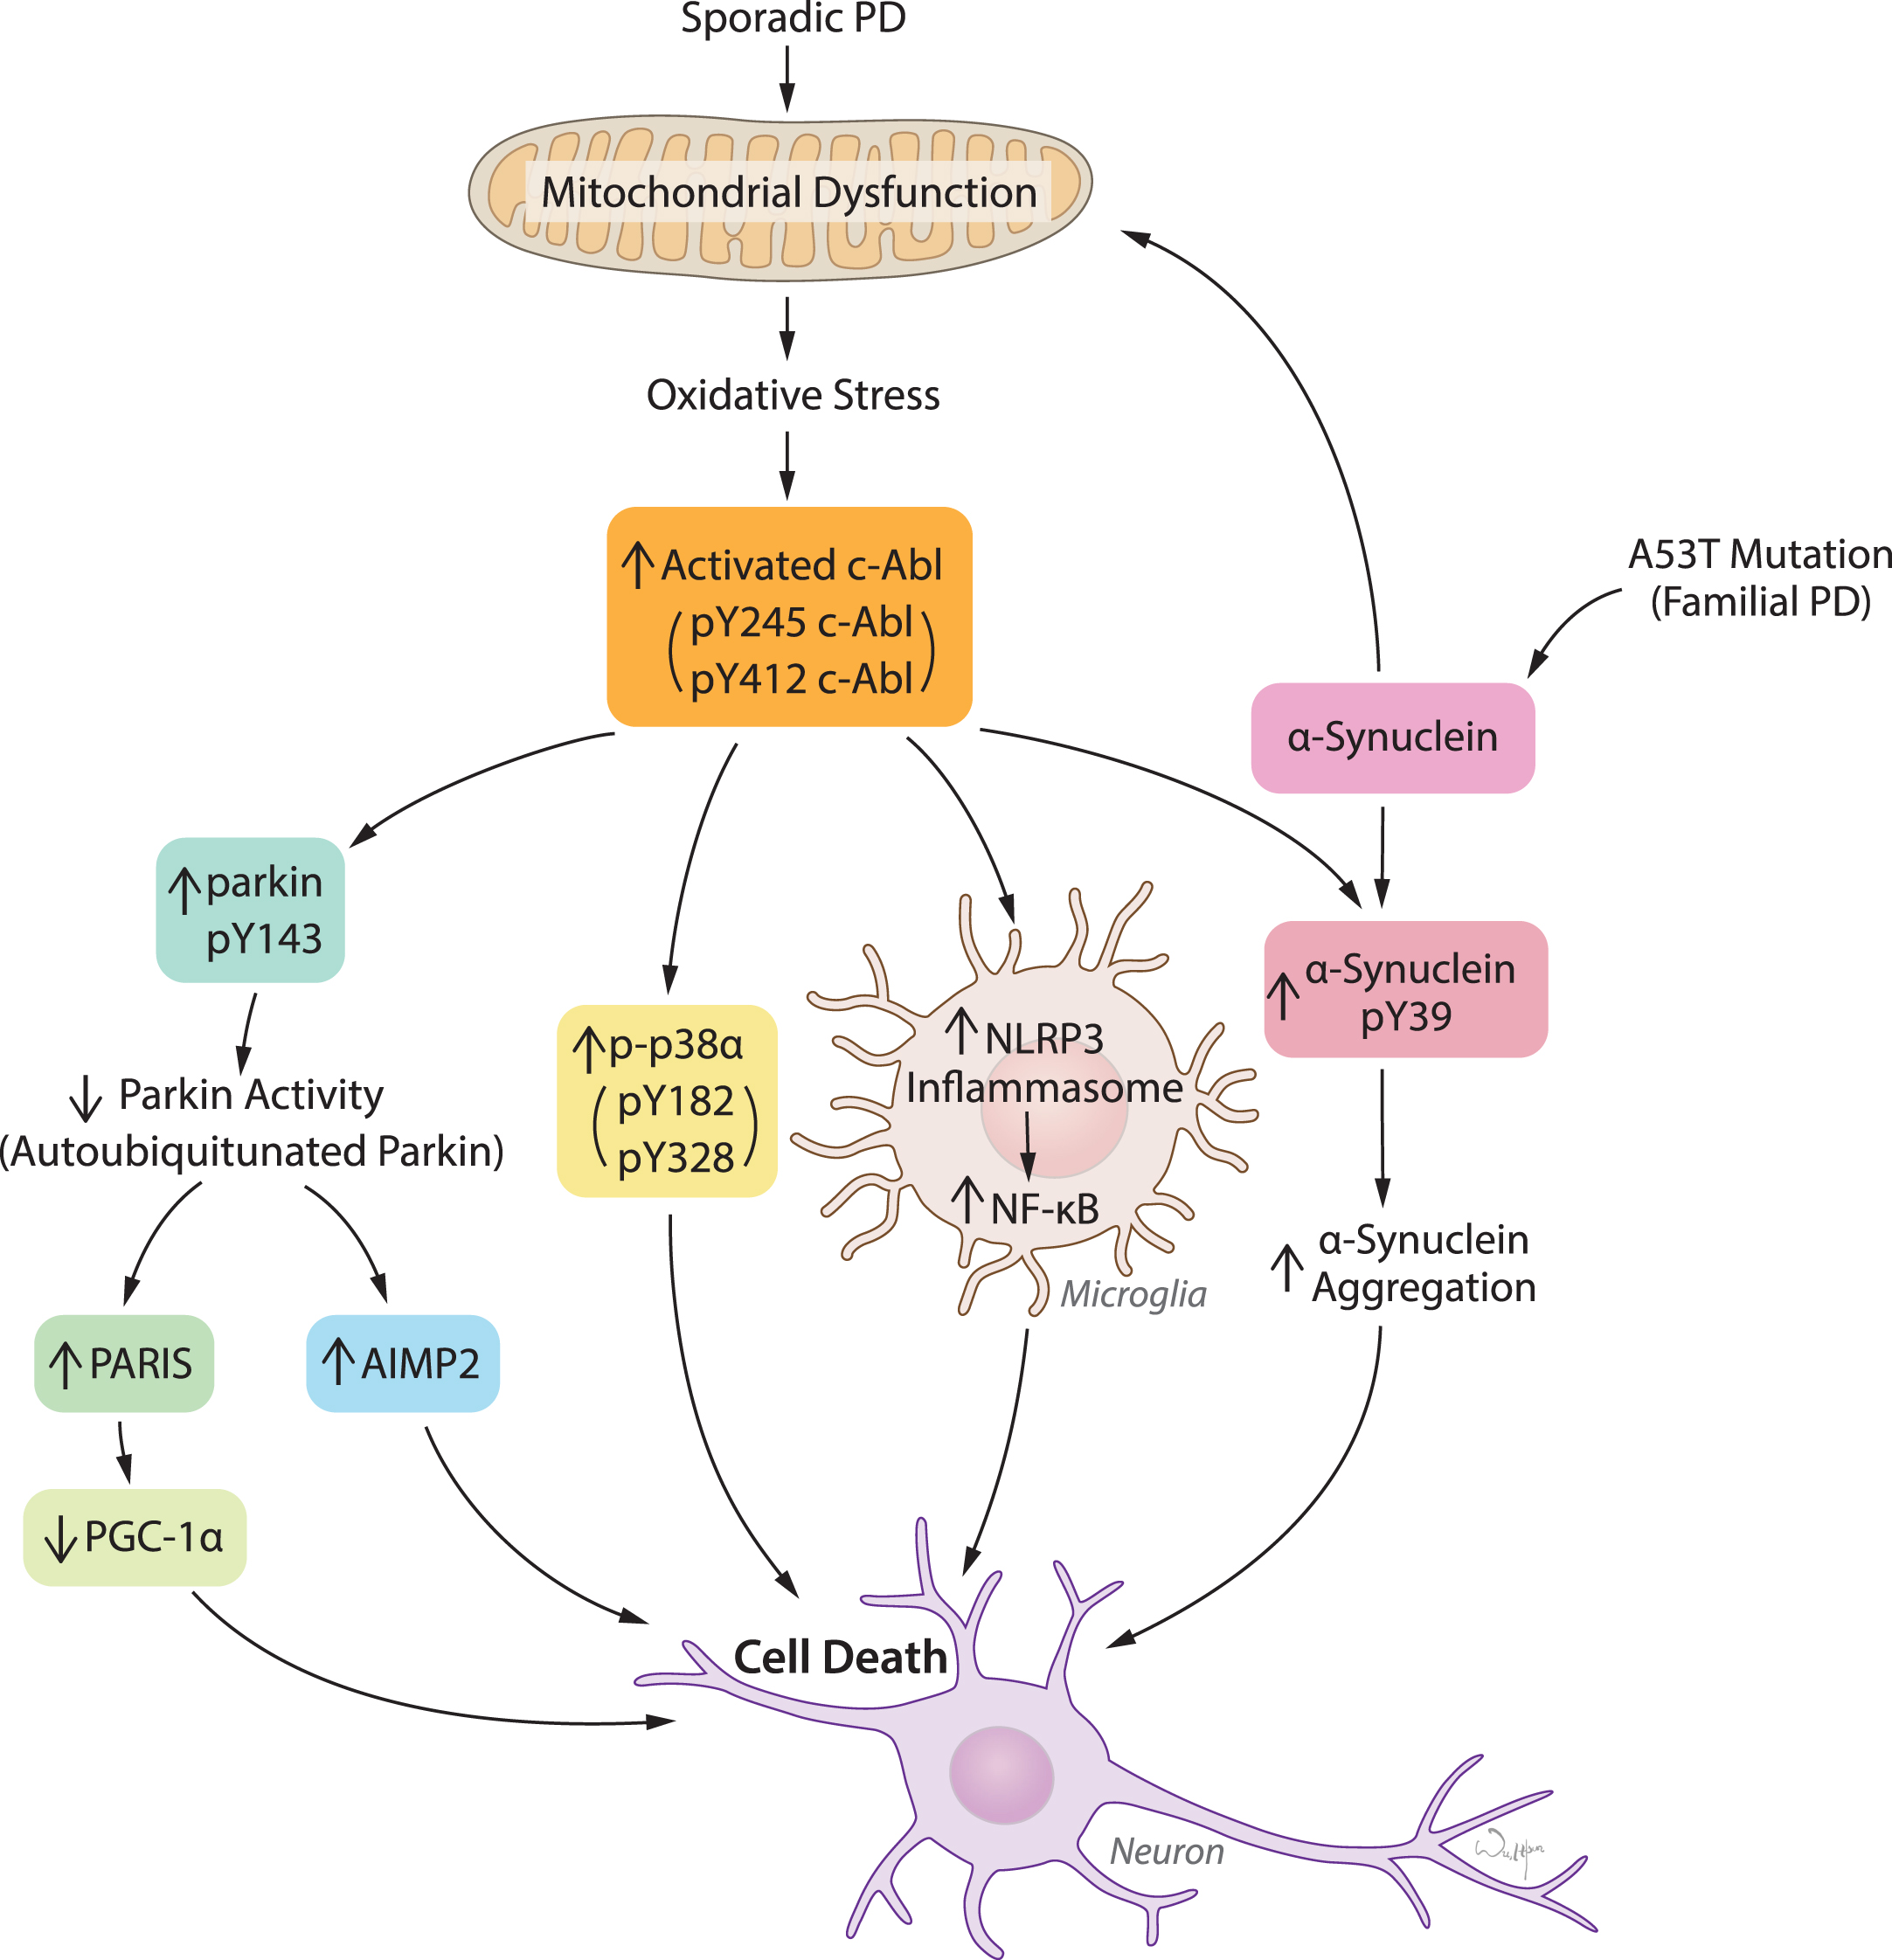 c-Abl activation links diverse pathogenic pathways leading to neuronal death in response to oxidative stress in PD and related α-synucleinopathies. Mitochondrial dysfunction and resulting oxidative stress is the key feature in both sporadic PD and familial PD related α-synucleinopathies. c-Abl activation acts as a sensor of oxidative stress which in turn triggers multiple pathogenic signals primarily leading to inactivation of parkin, activation of p38α, NLRP3-inflammasome-mediated NF-κB activation in microglia, and α-synuclein phosphorylation at Y39. Parkin inactivation causes accumulation of pathogenic parkin substrates PARIS and AIMP2 and subsequently neuronal death. Activation of p38α and microglial activation of NF-κB merge on to cellular death. α-synuclein phosphorylation at Y39 is potentially linked to aggregation and neuronal toxicity.